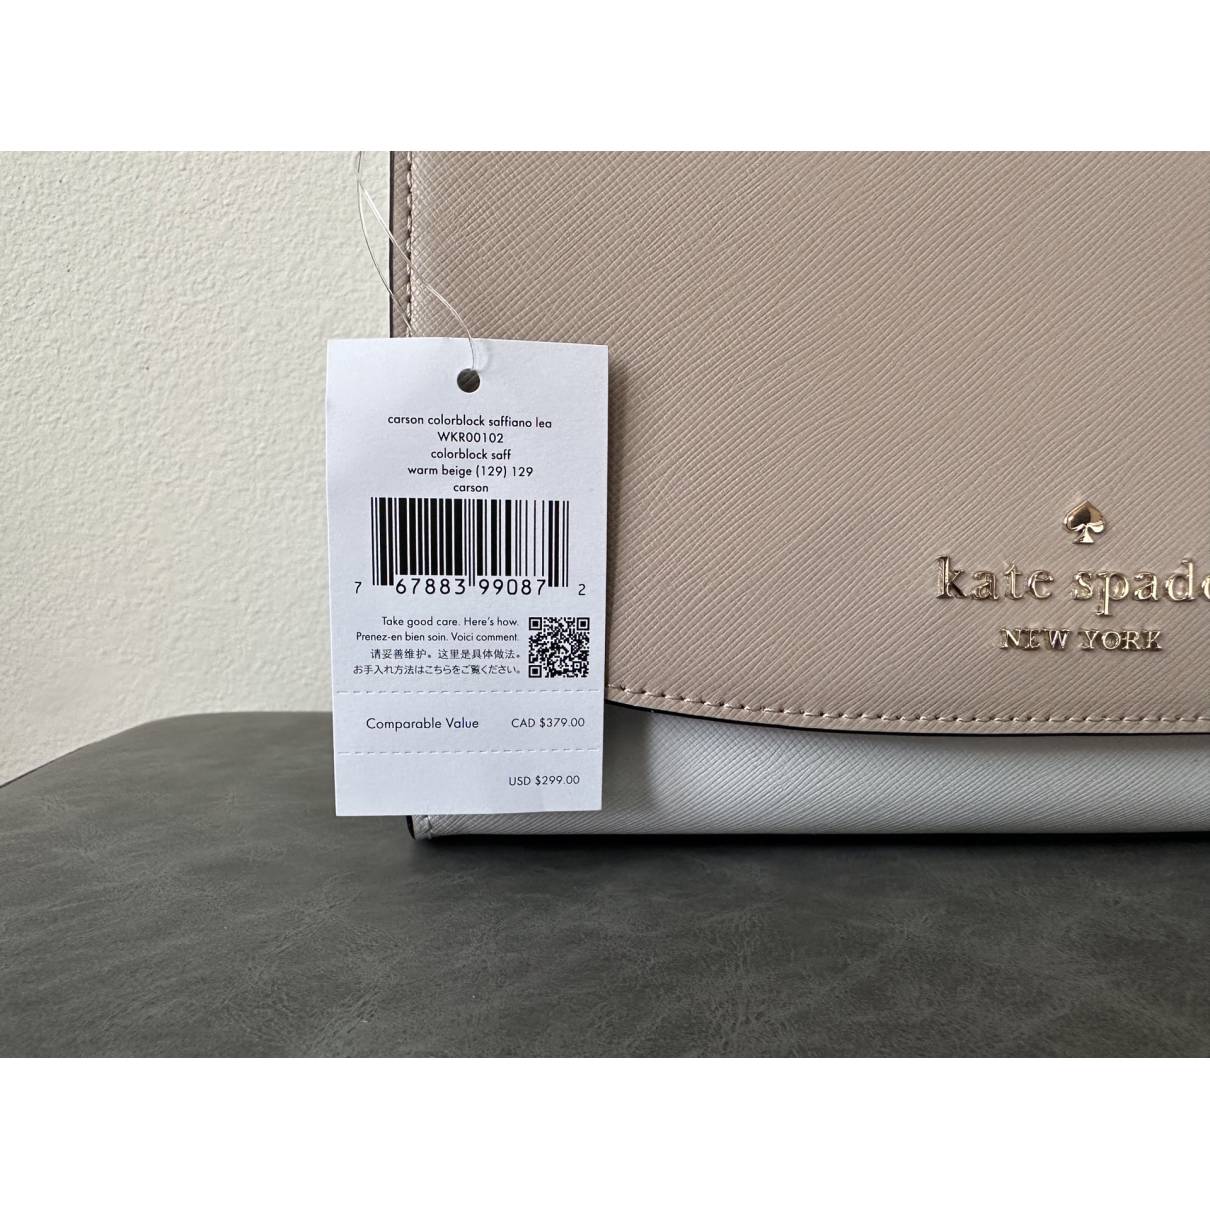 Kate Spade - Authenticated Handbag - Leather Beige Plain for Women, Never Worn, with Tag